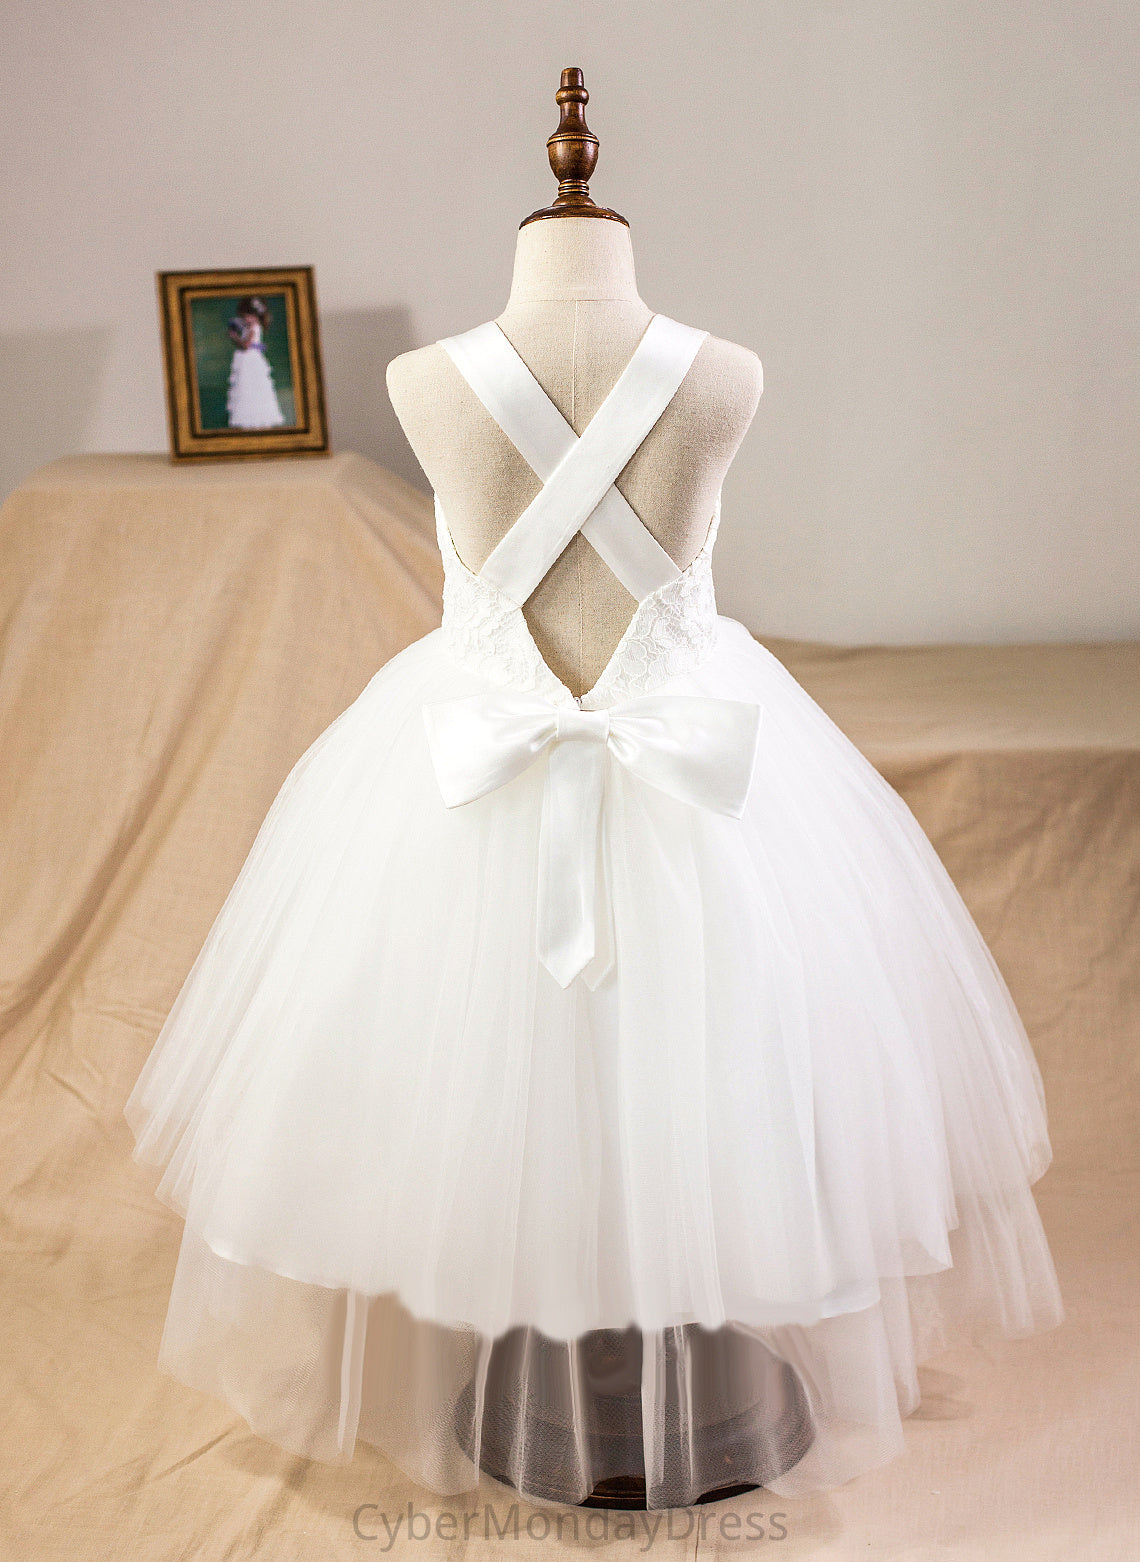 Straps Dress - Bow(s) Girl Flower Flower Girl Dresses With Tea-length Lilia Satin/Tulle/Lace Sleeveless Ball-Gown/Princess